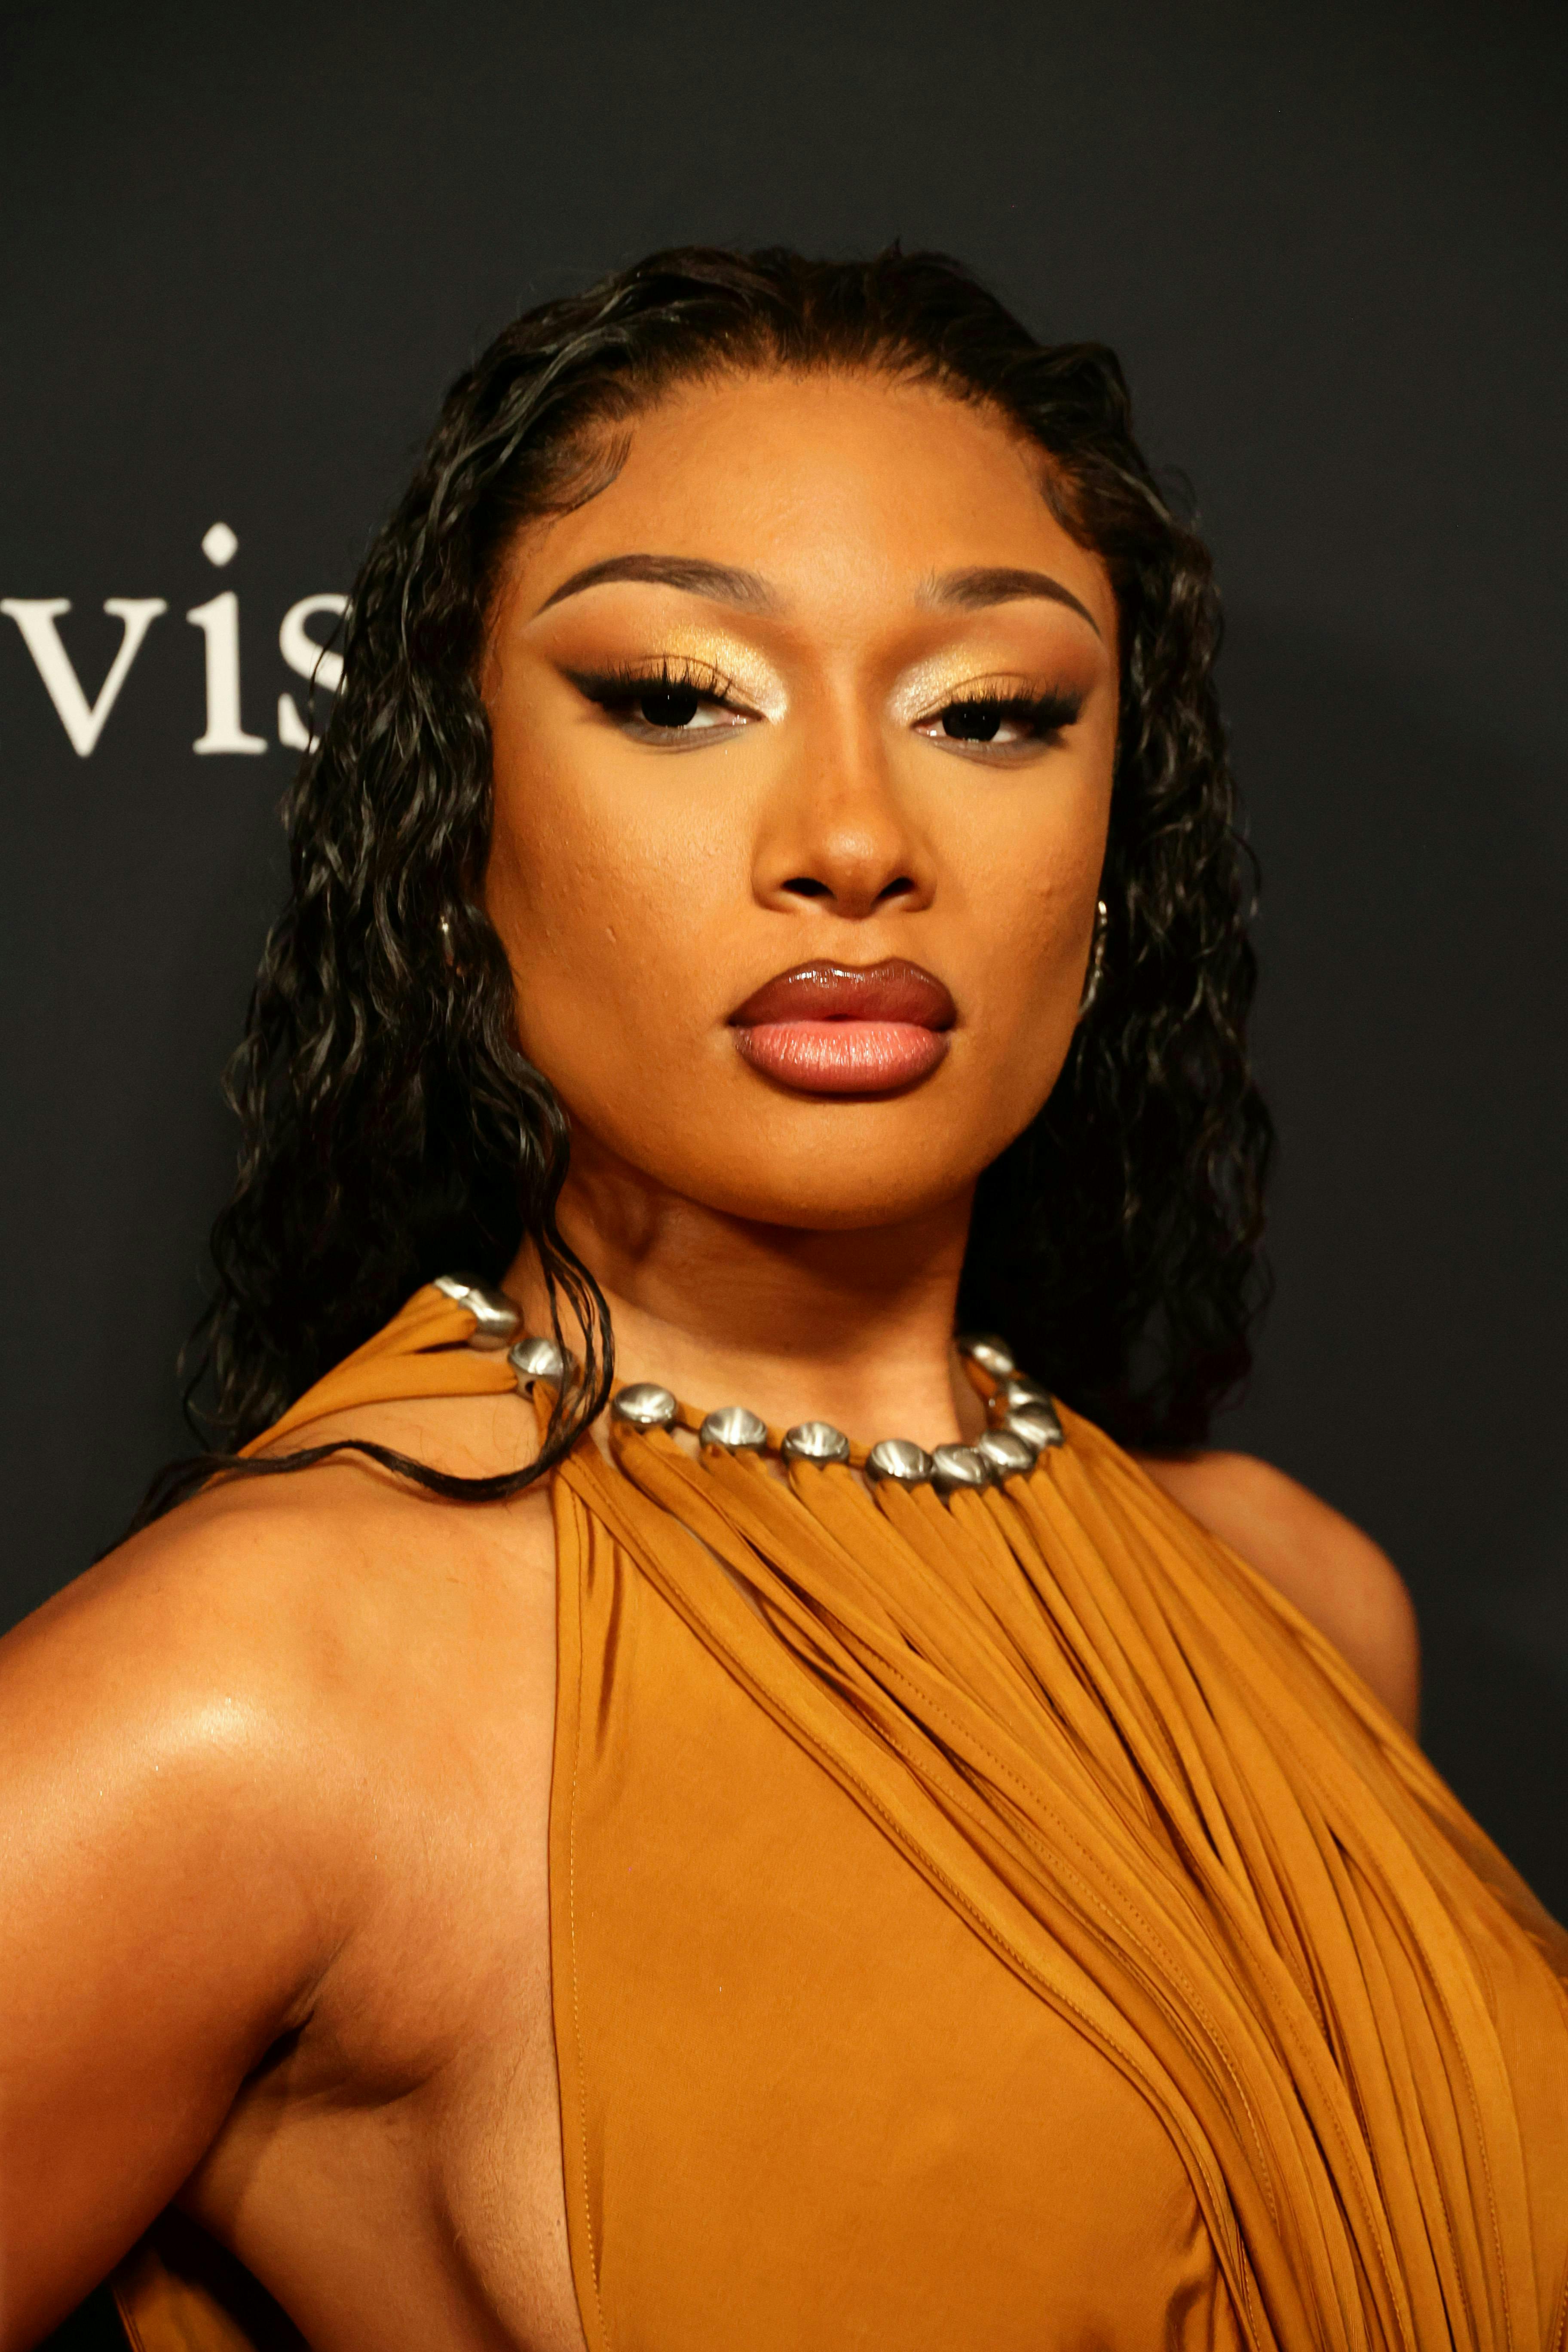 Megan Thee Stallion attends the 66th GRAMMY Awards Pre-GRAMMY Gala & GRAMMY Salut. Photo courtesy of Getty Images.